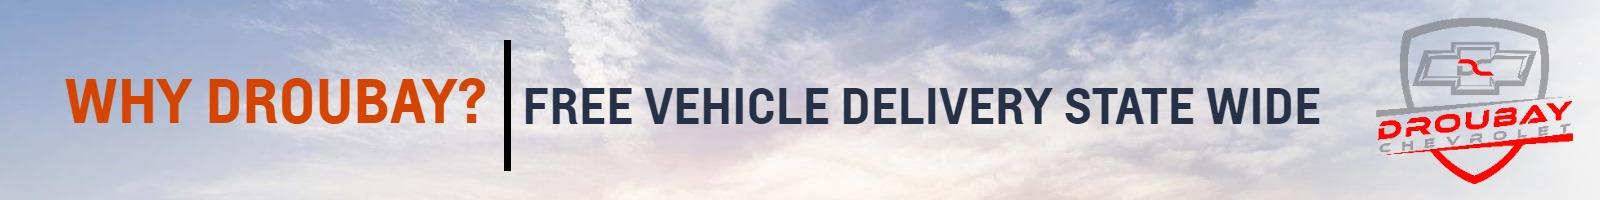 FREE VEHICLE DELIVERY STATE WIDE